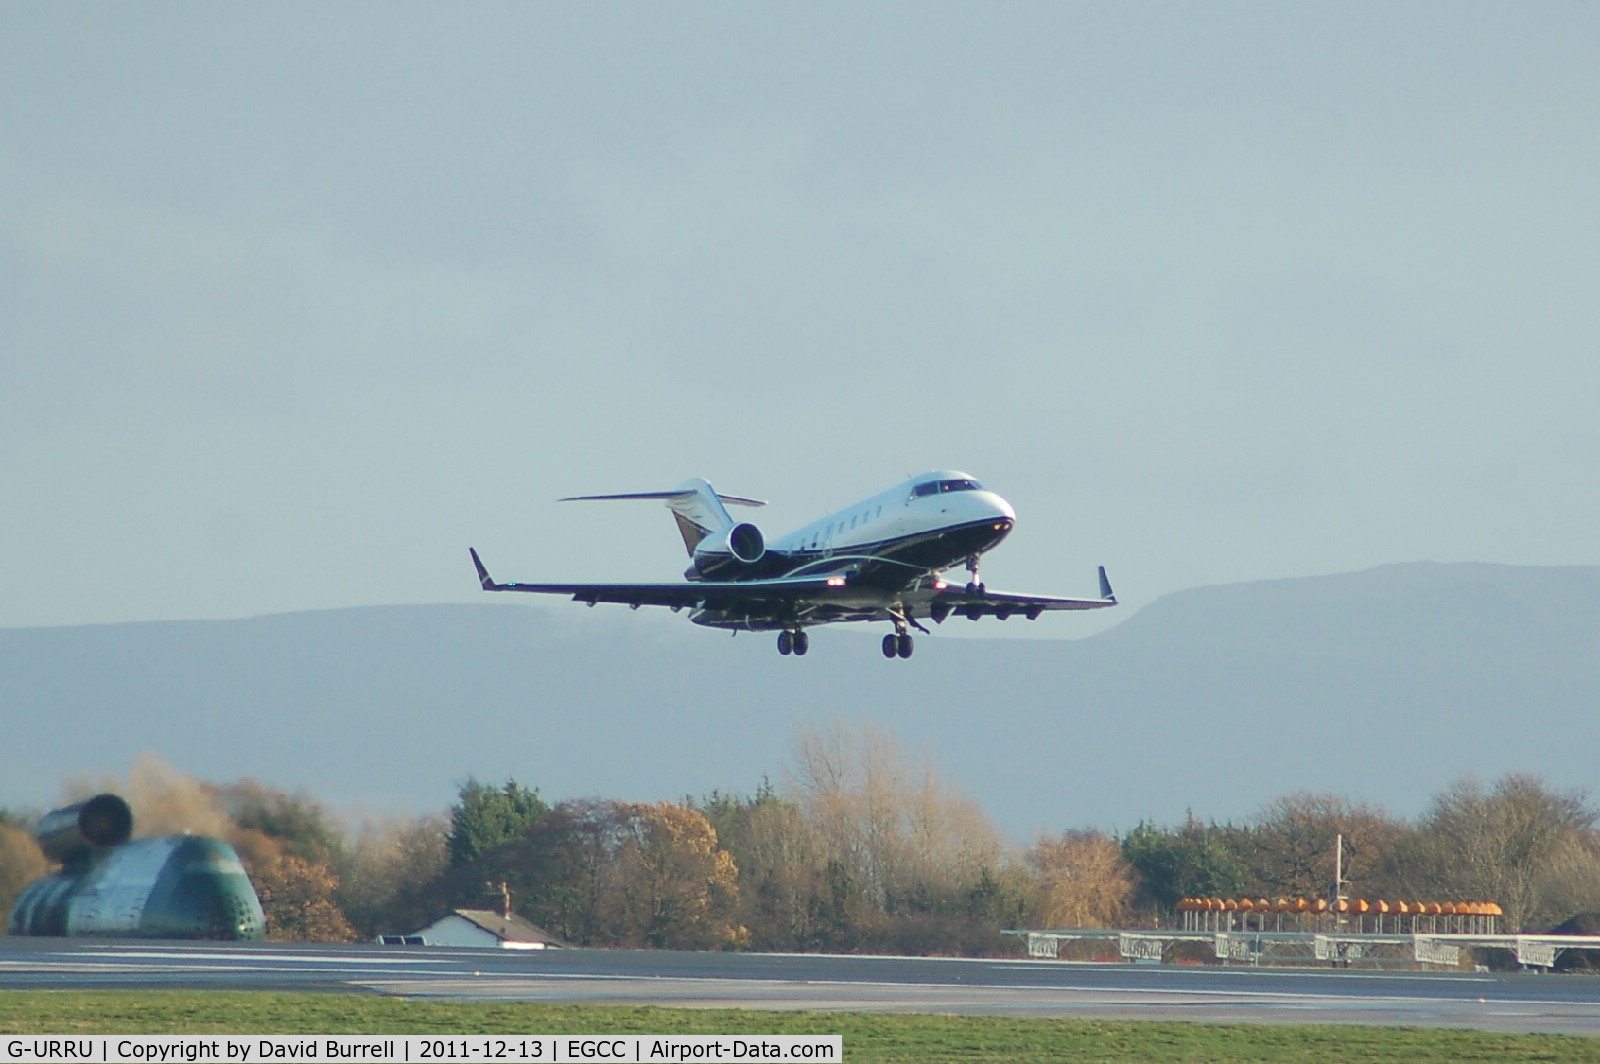 G-URRU, 2009 Bombardier Challenger 605 (CL-600-2B16) C/N 5821, Bombardier CL-600-2B16 Taking Off Manchester Airport.